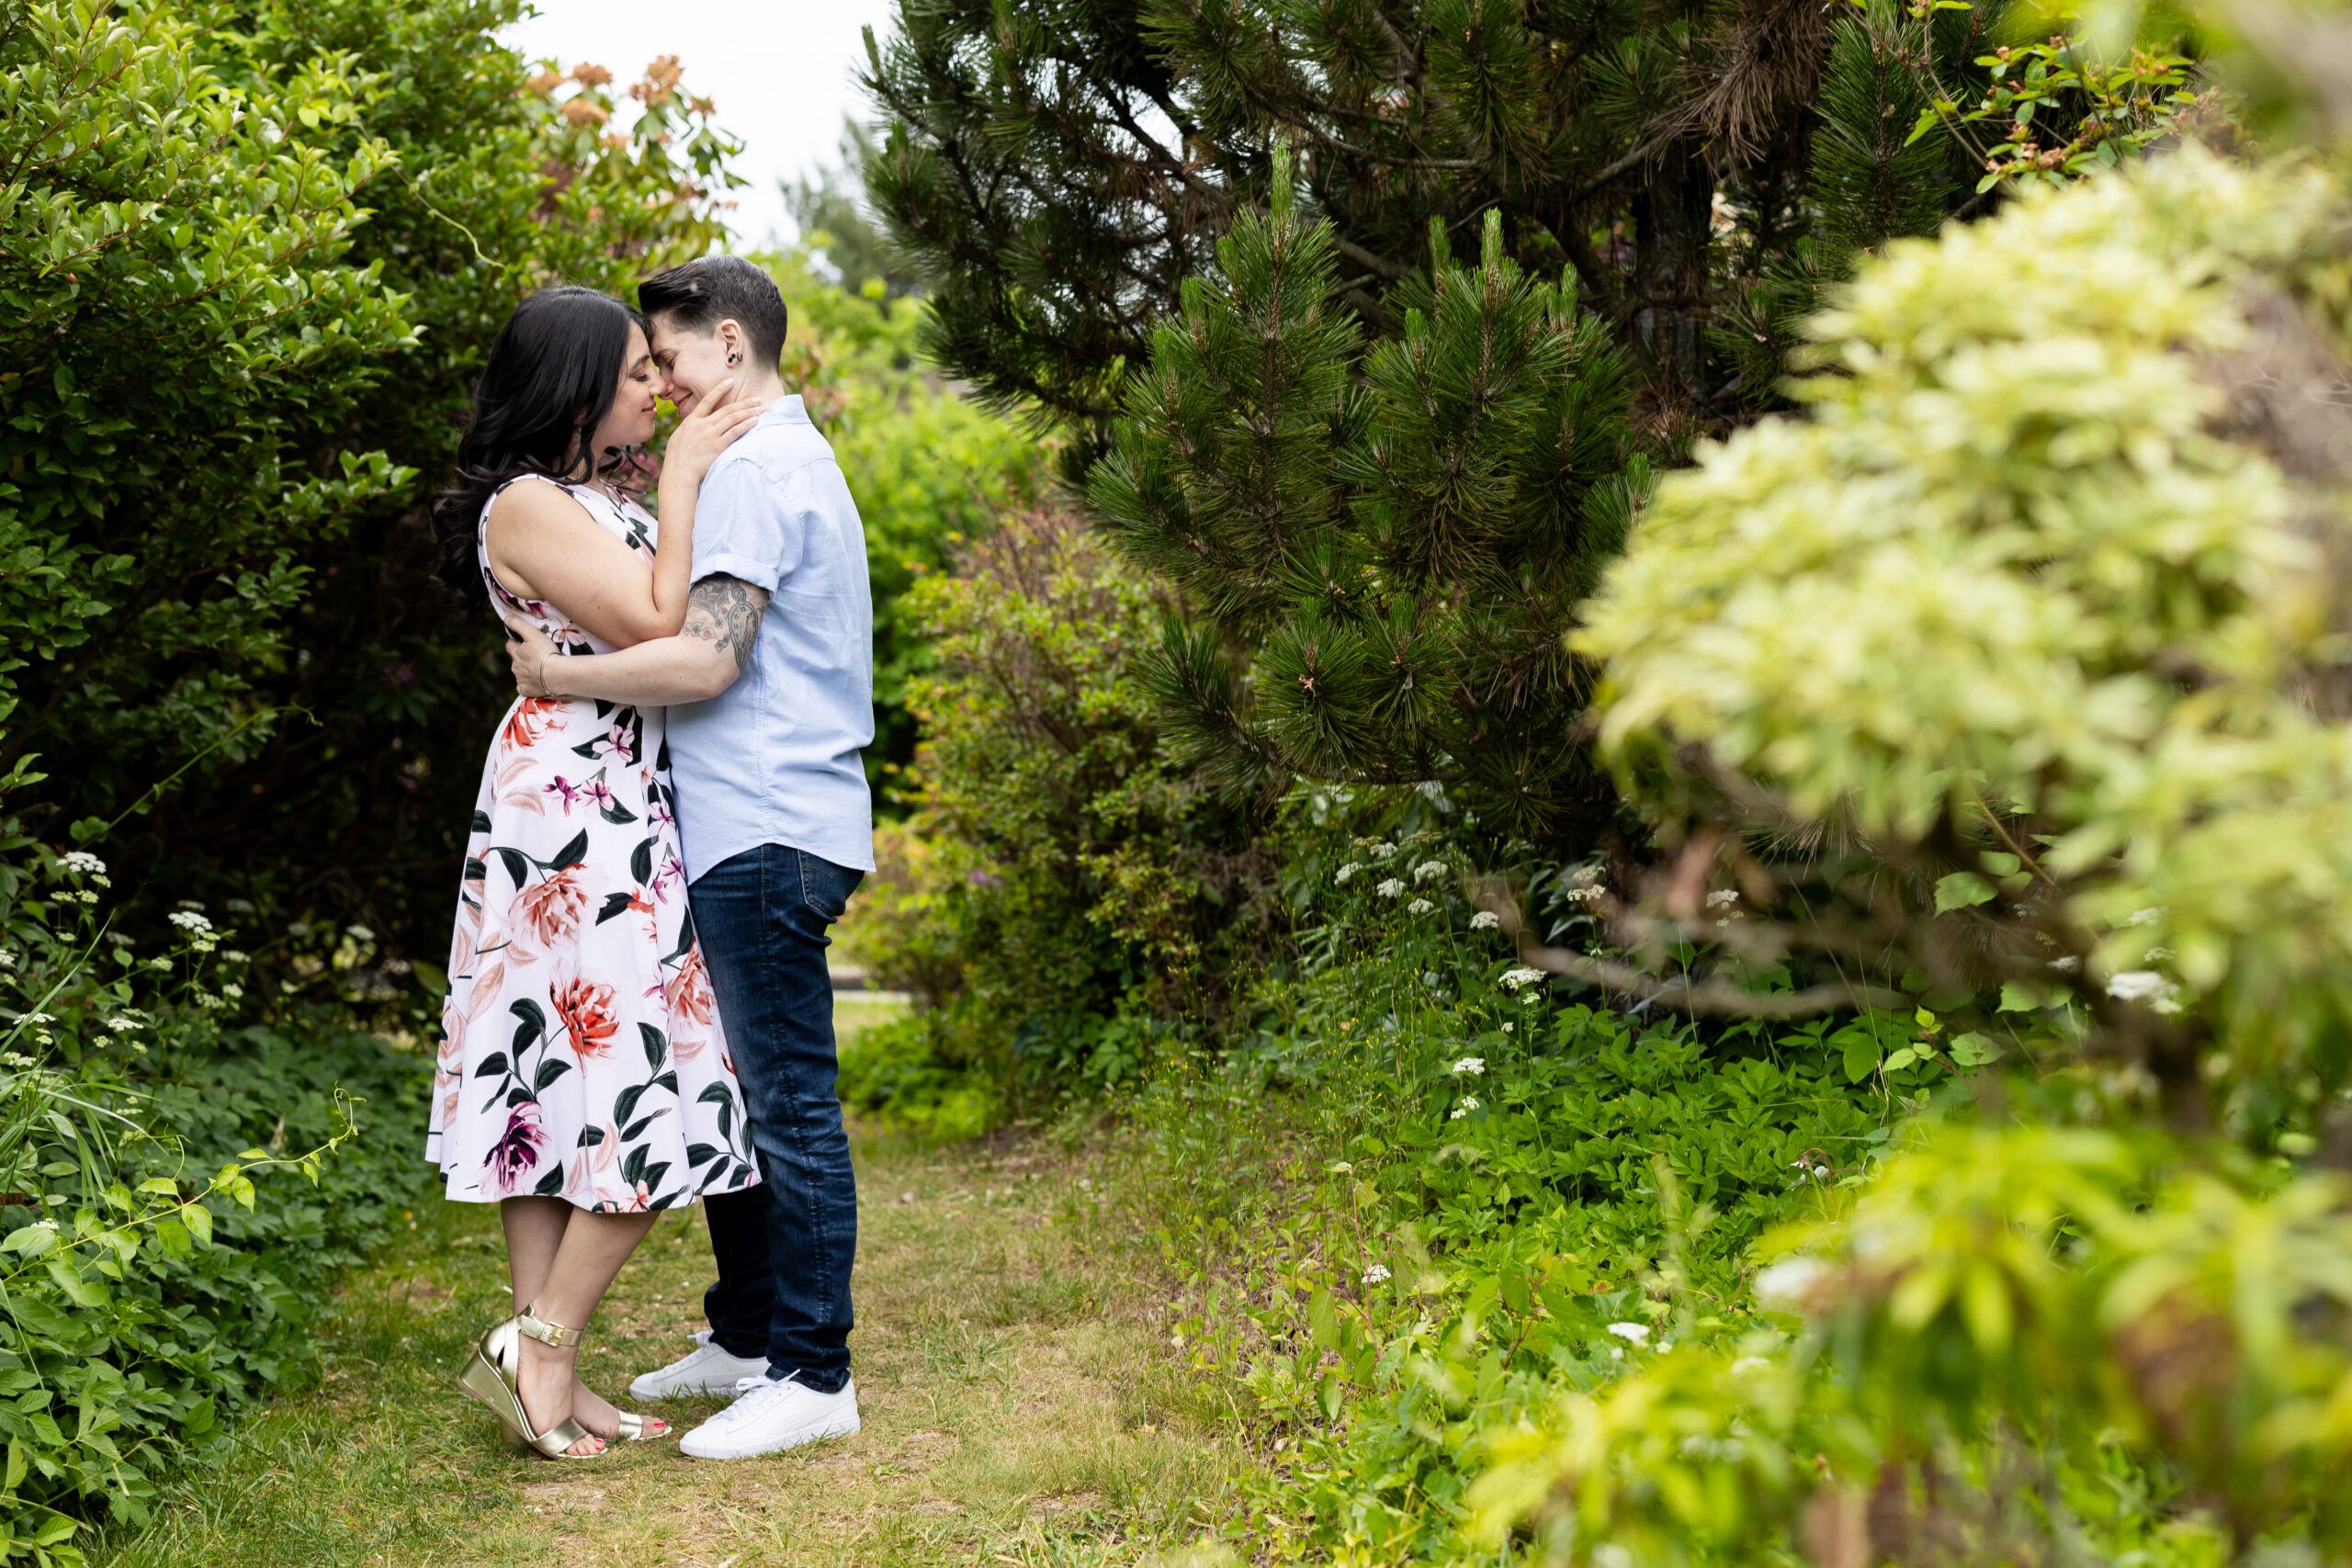 LGBTQ+ couple's engagement session portraits at the enchanting New Jersey Botanical Garden Skyland Manor in Ringwood, NJ. The picturesque garden setting provides a beautiful backdrop for this special occasion, captured by North Jersey wedding photographer Jarot Bocanegra